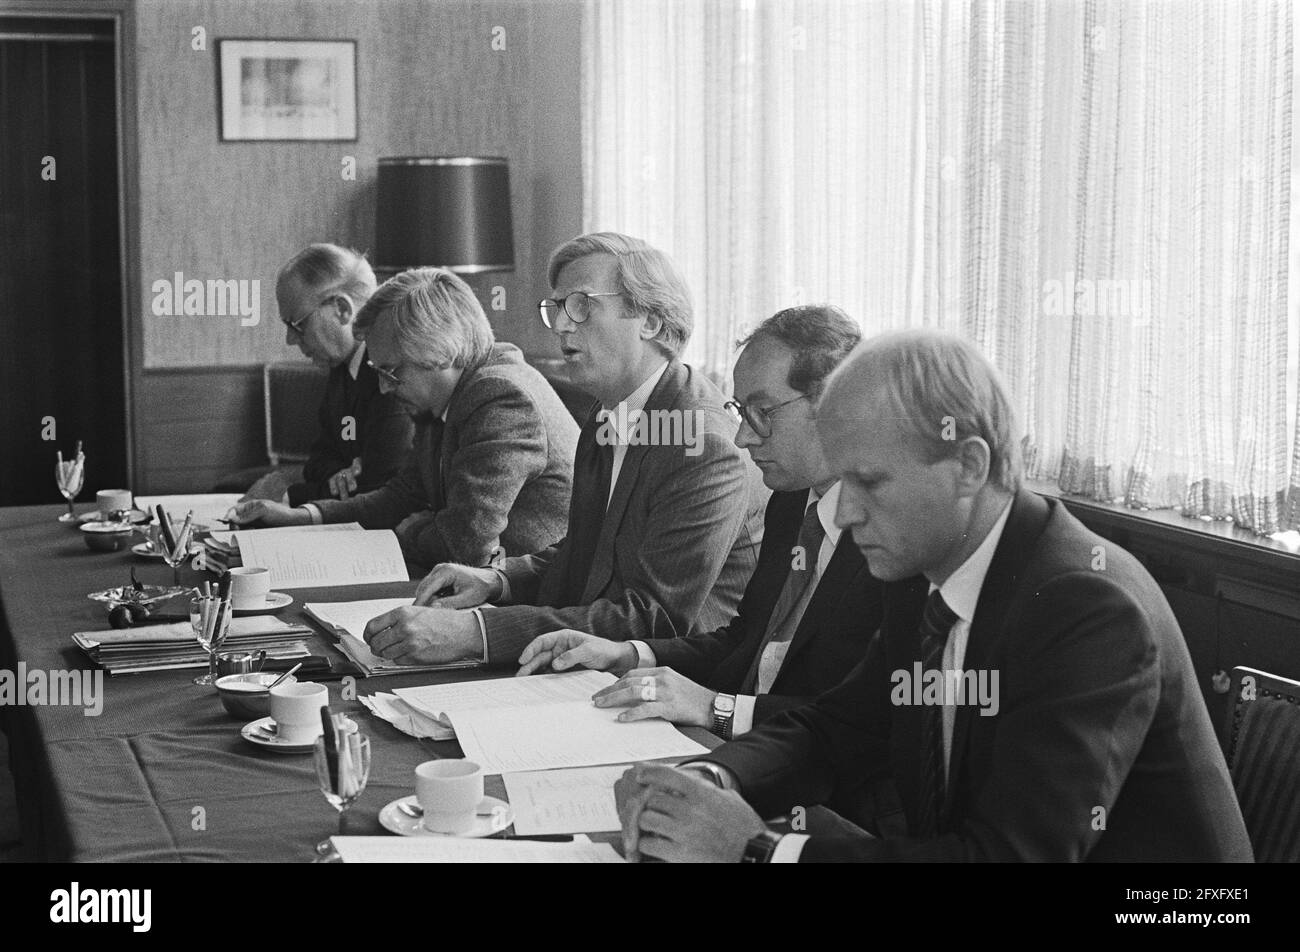 From left to right, unknown, general manager Kerdel, director J. Krant and director V. Hedel, June 28, 1983, directors, stock exchanges, press conferences, The Netherlands, 20th century press agency photo, news to remember, documentary, historic photography 1945-1990, visual stories, human history of the Twentieth Century, capturing moments in time Stock Photo